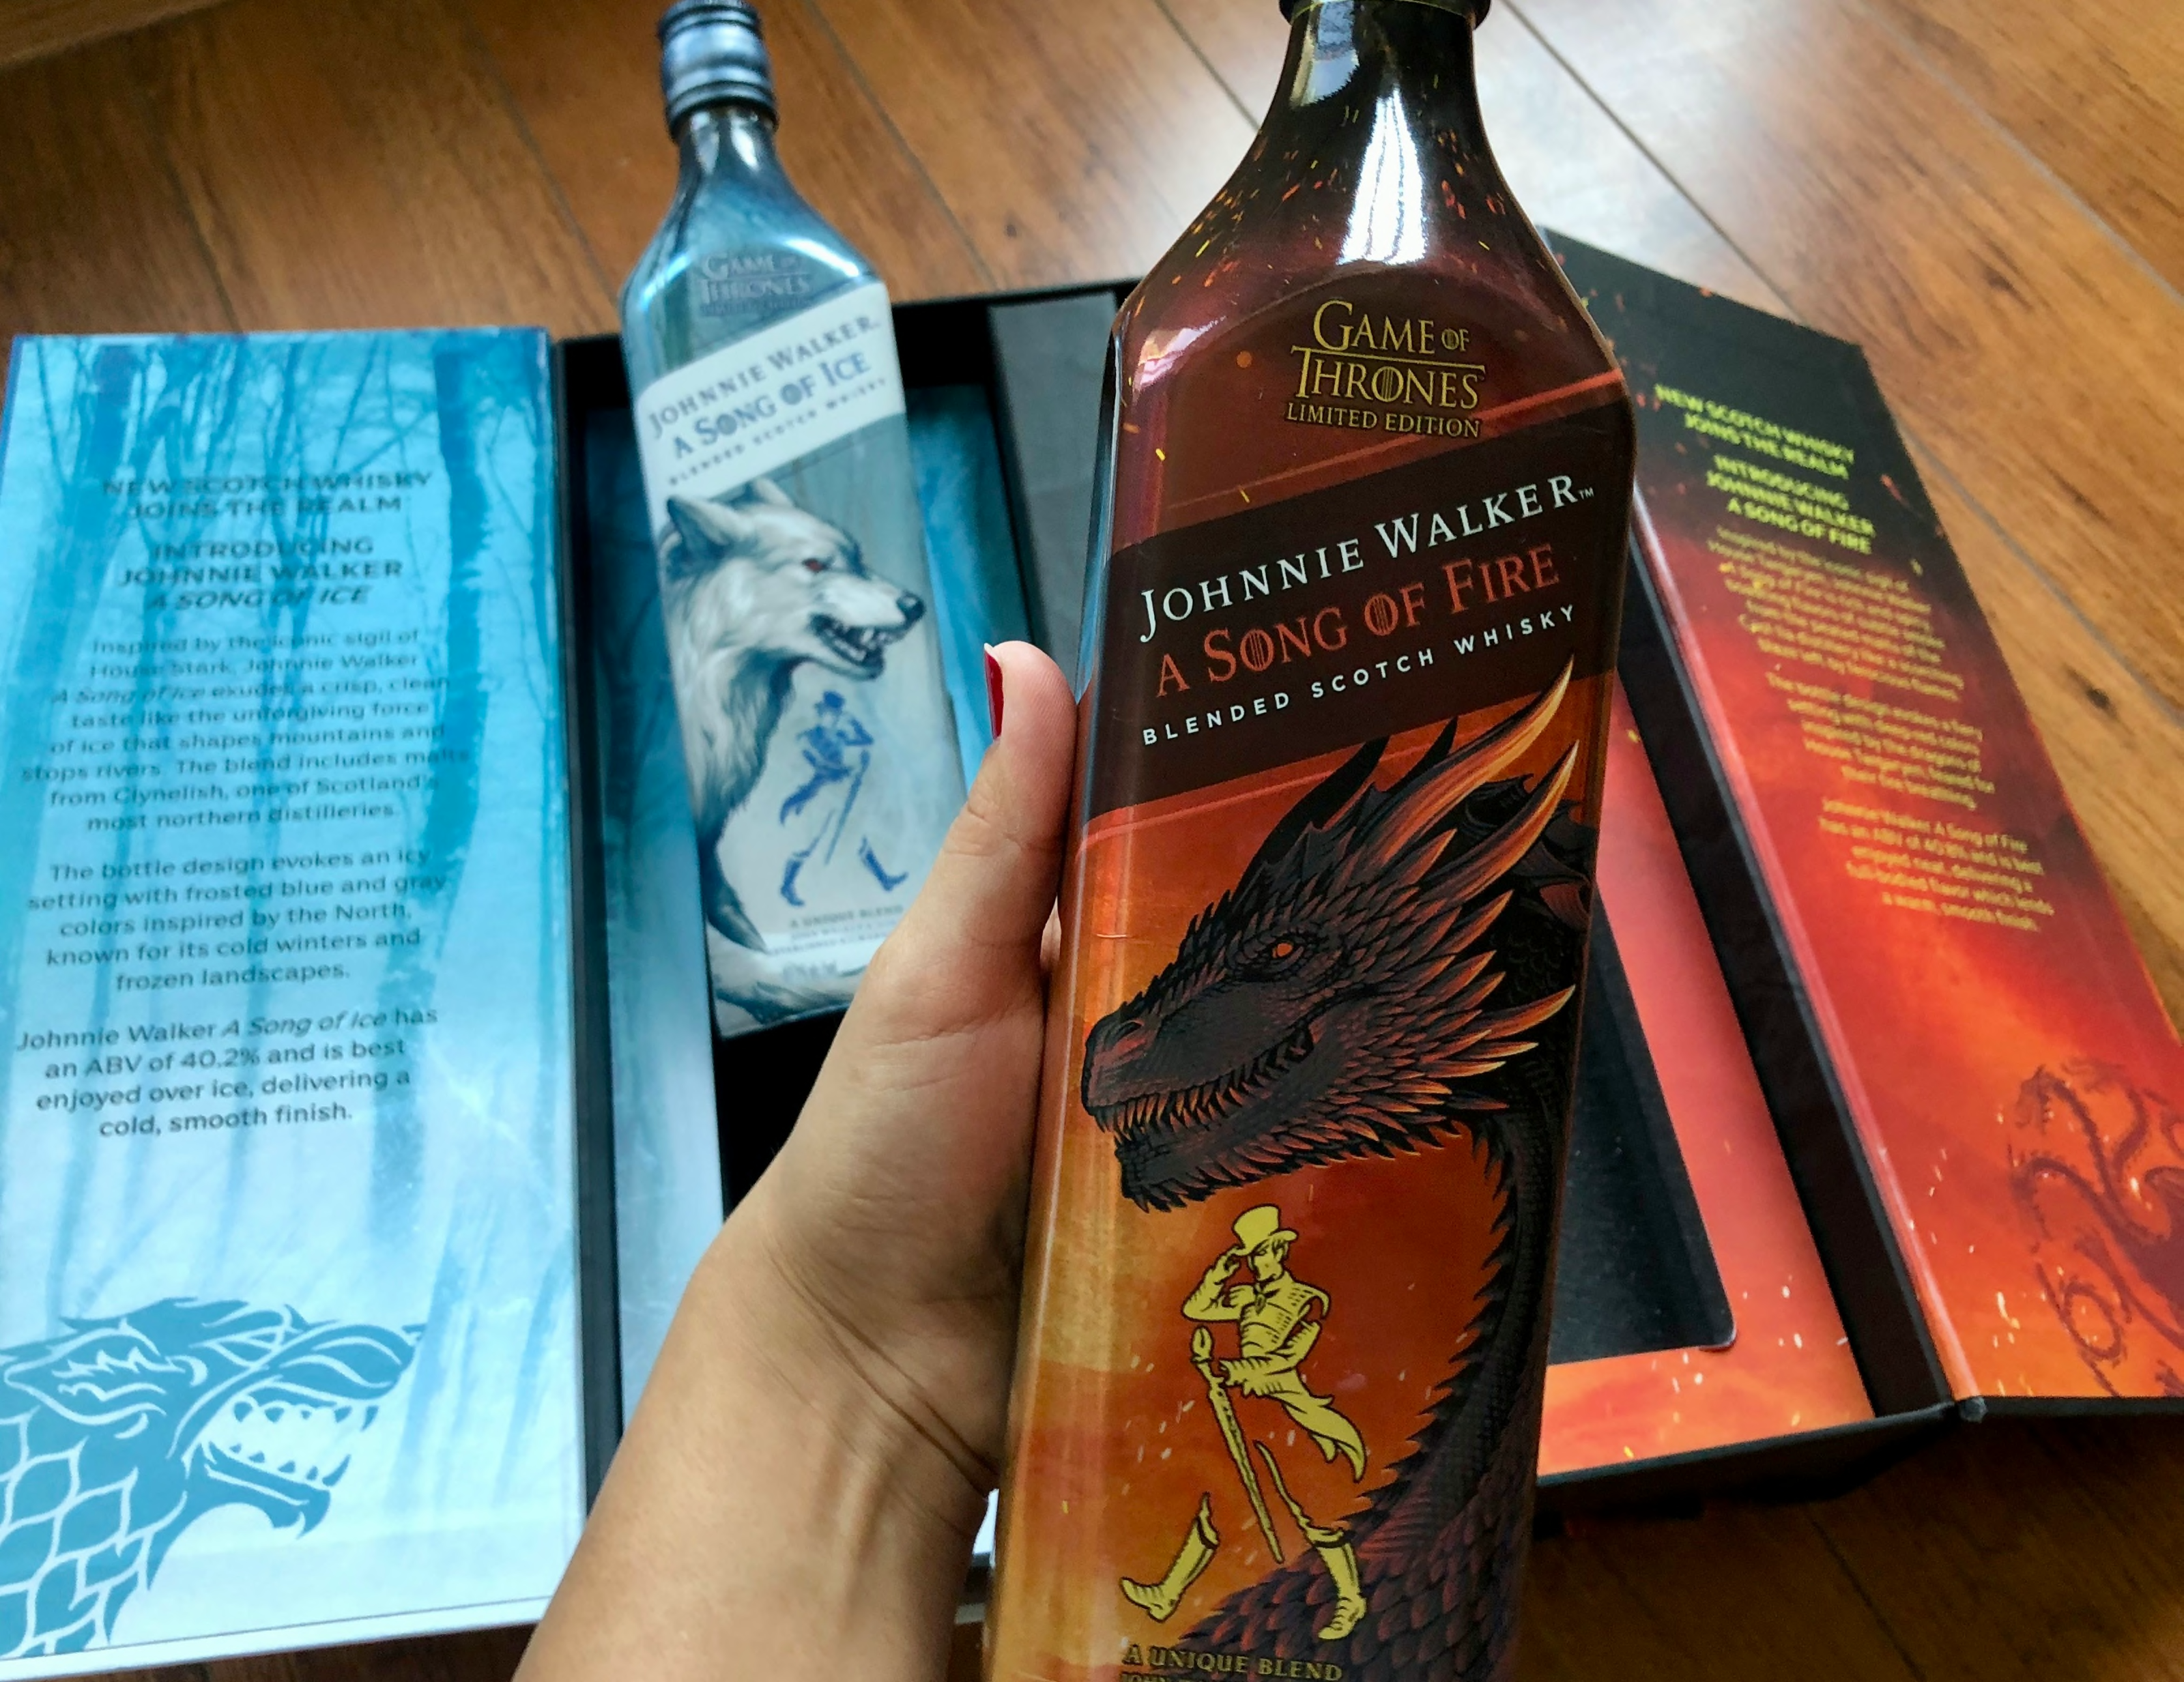 Whisky Johnnie Walker A Song of Fire